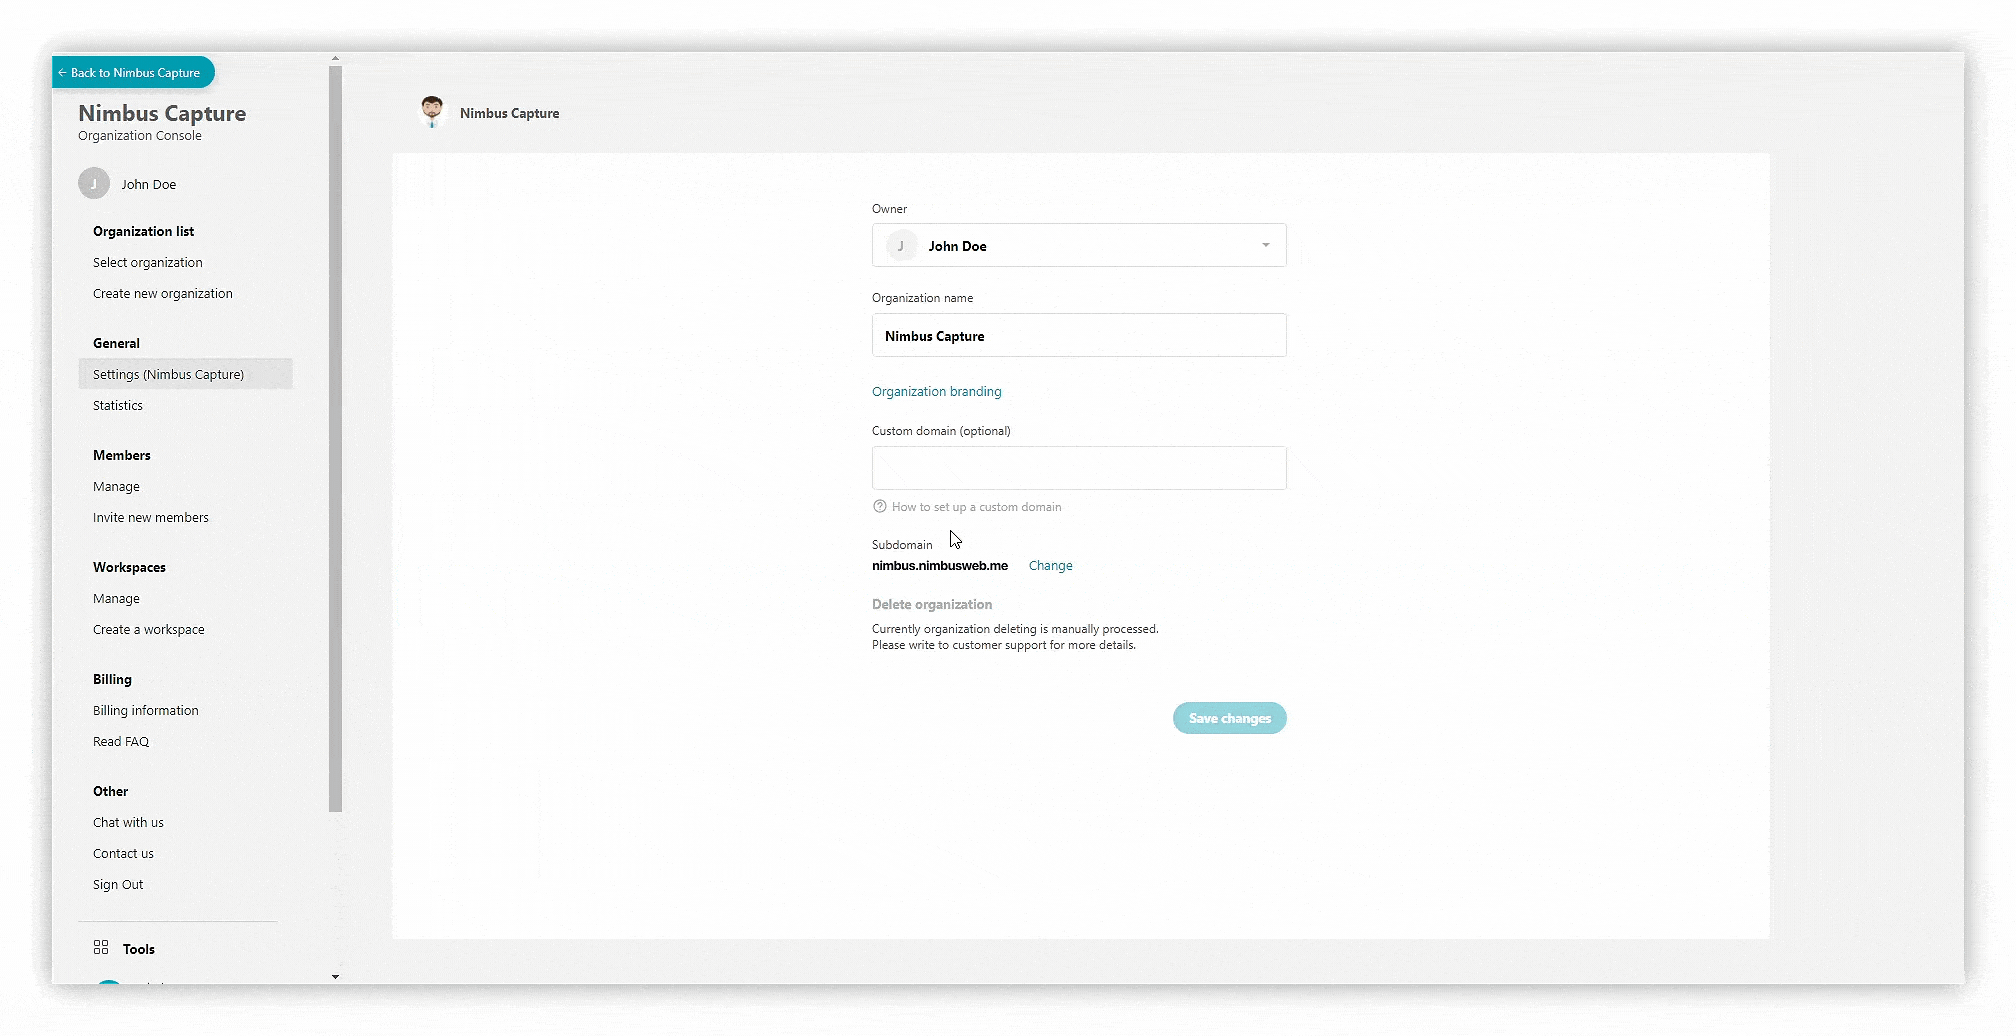 You can set a big logo for the sign-in page as well as small logo for the organization.